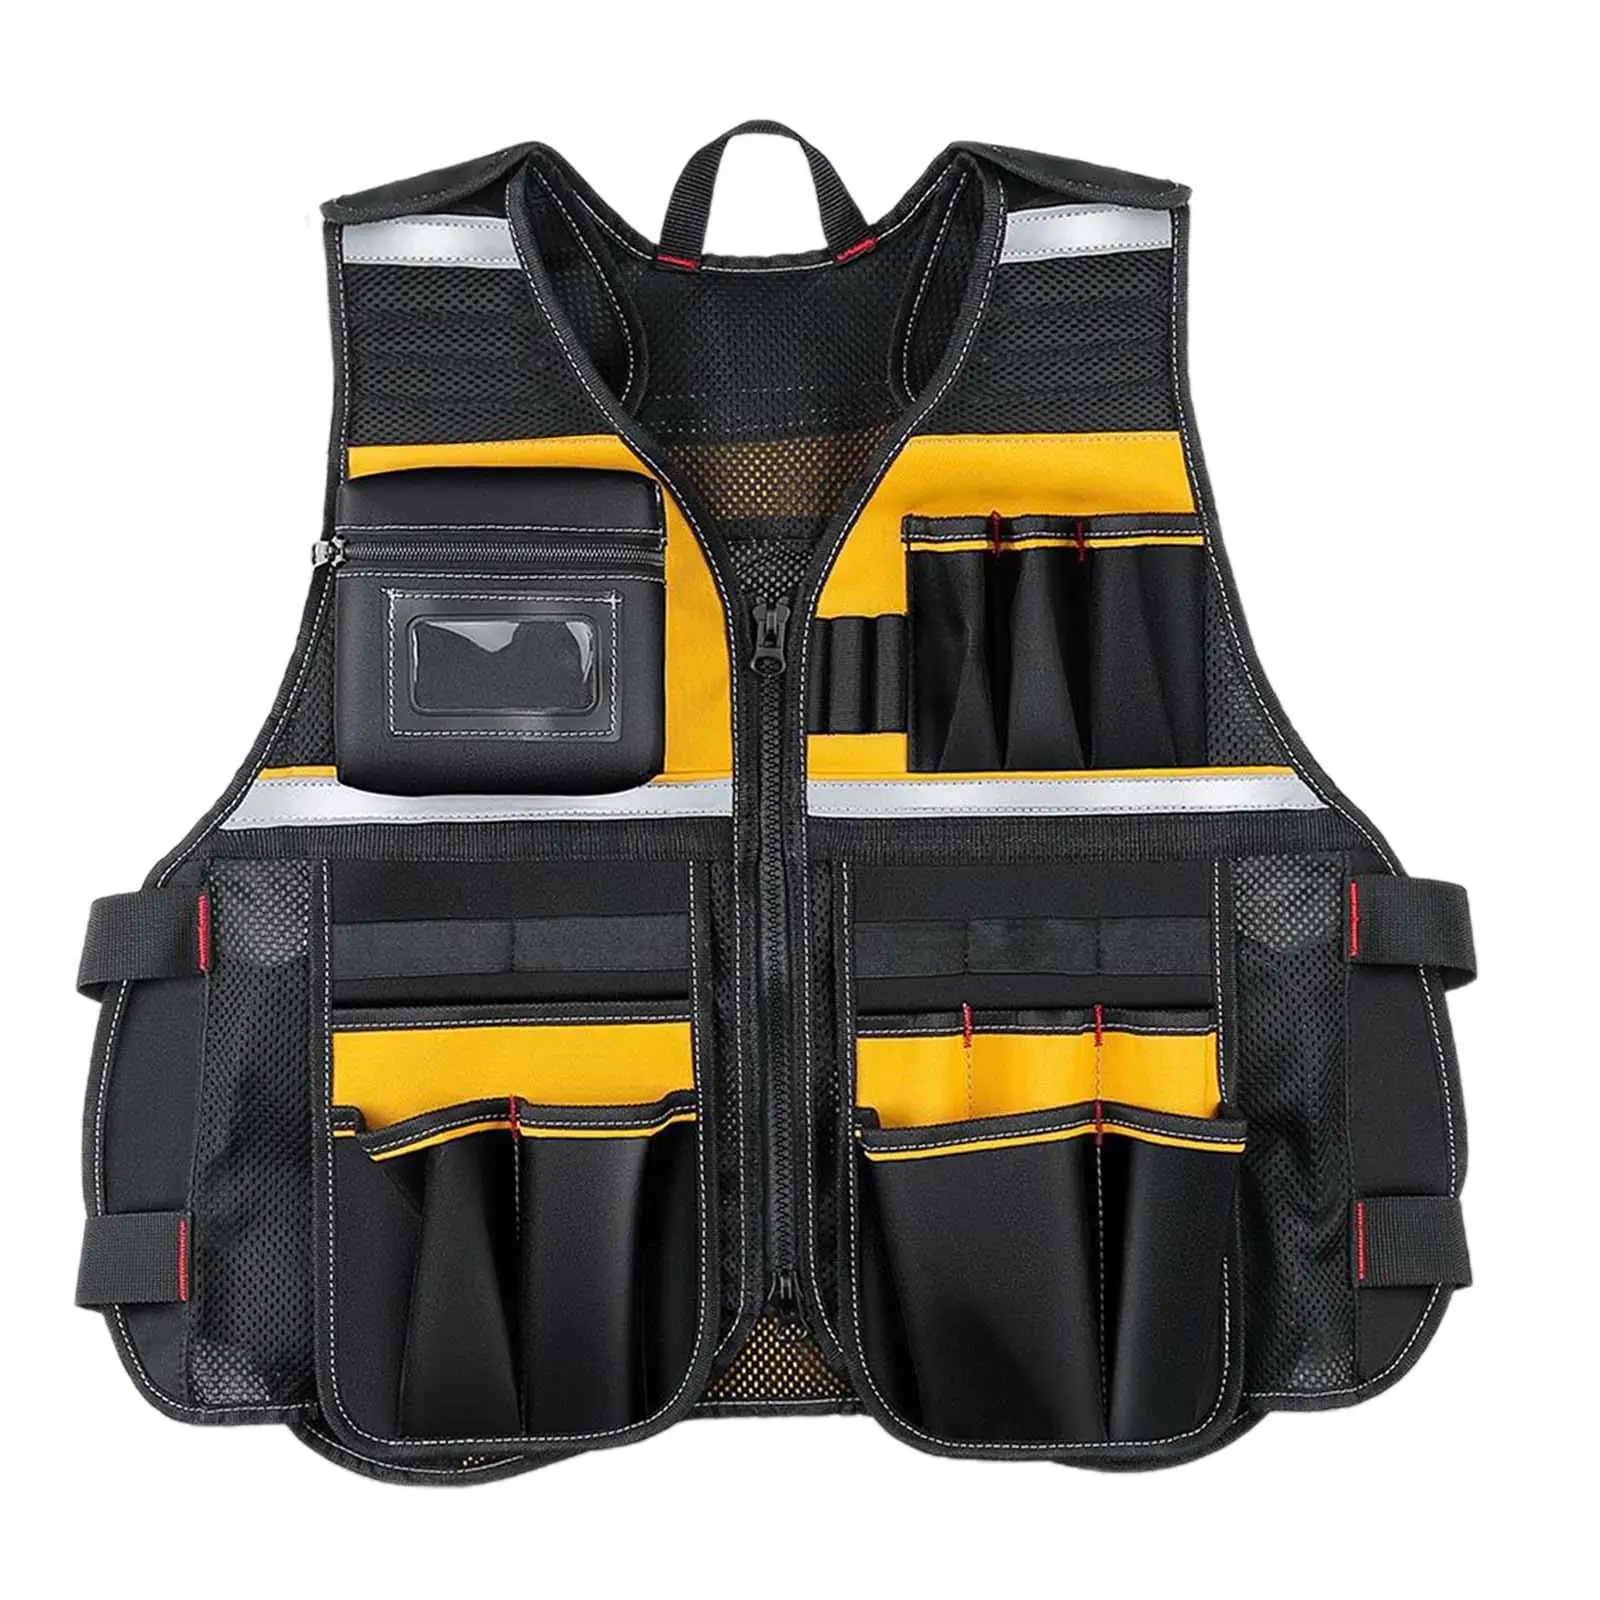 Tool Vest with Pockets Fishing Tool Pouch Universal Safety Vest Adjustable for Construction Worker Electricians Fishing Unisex